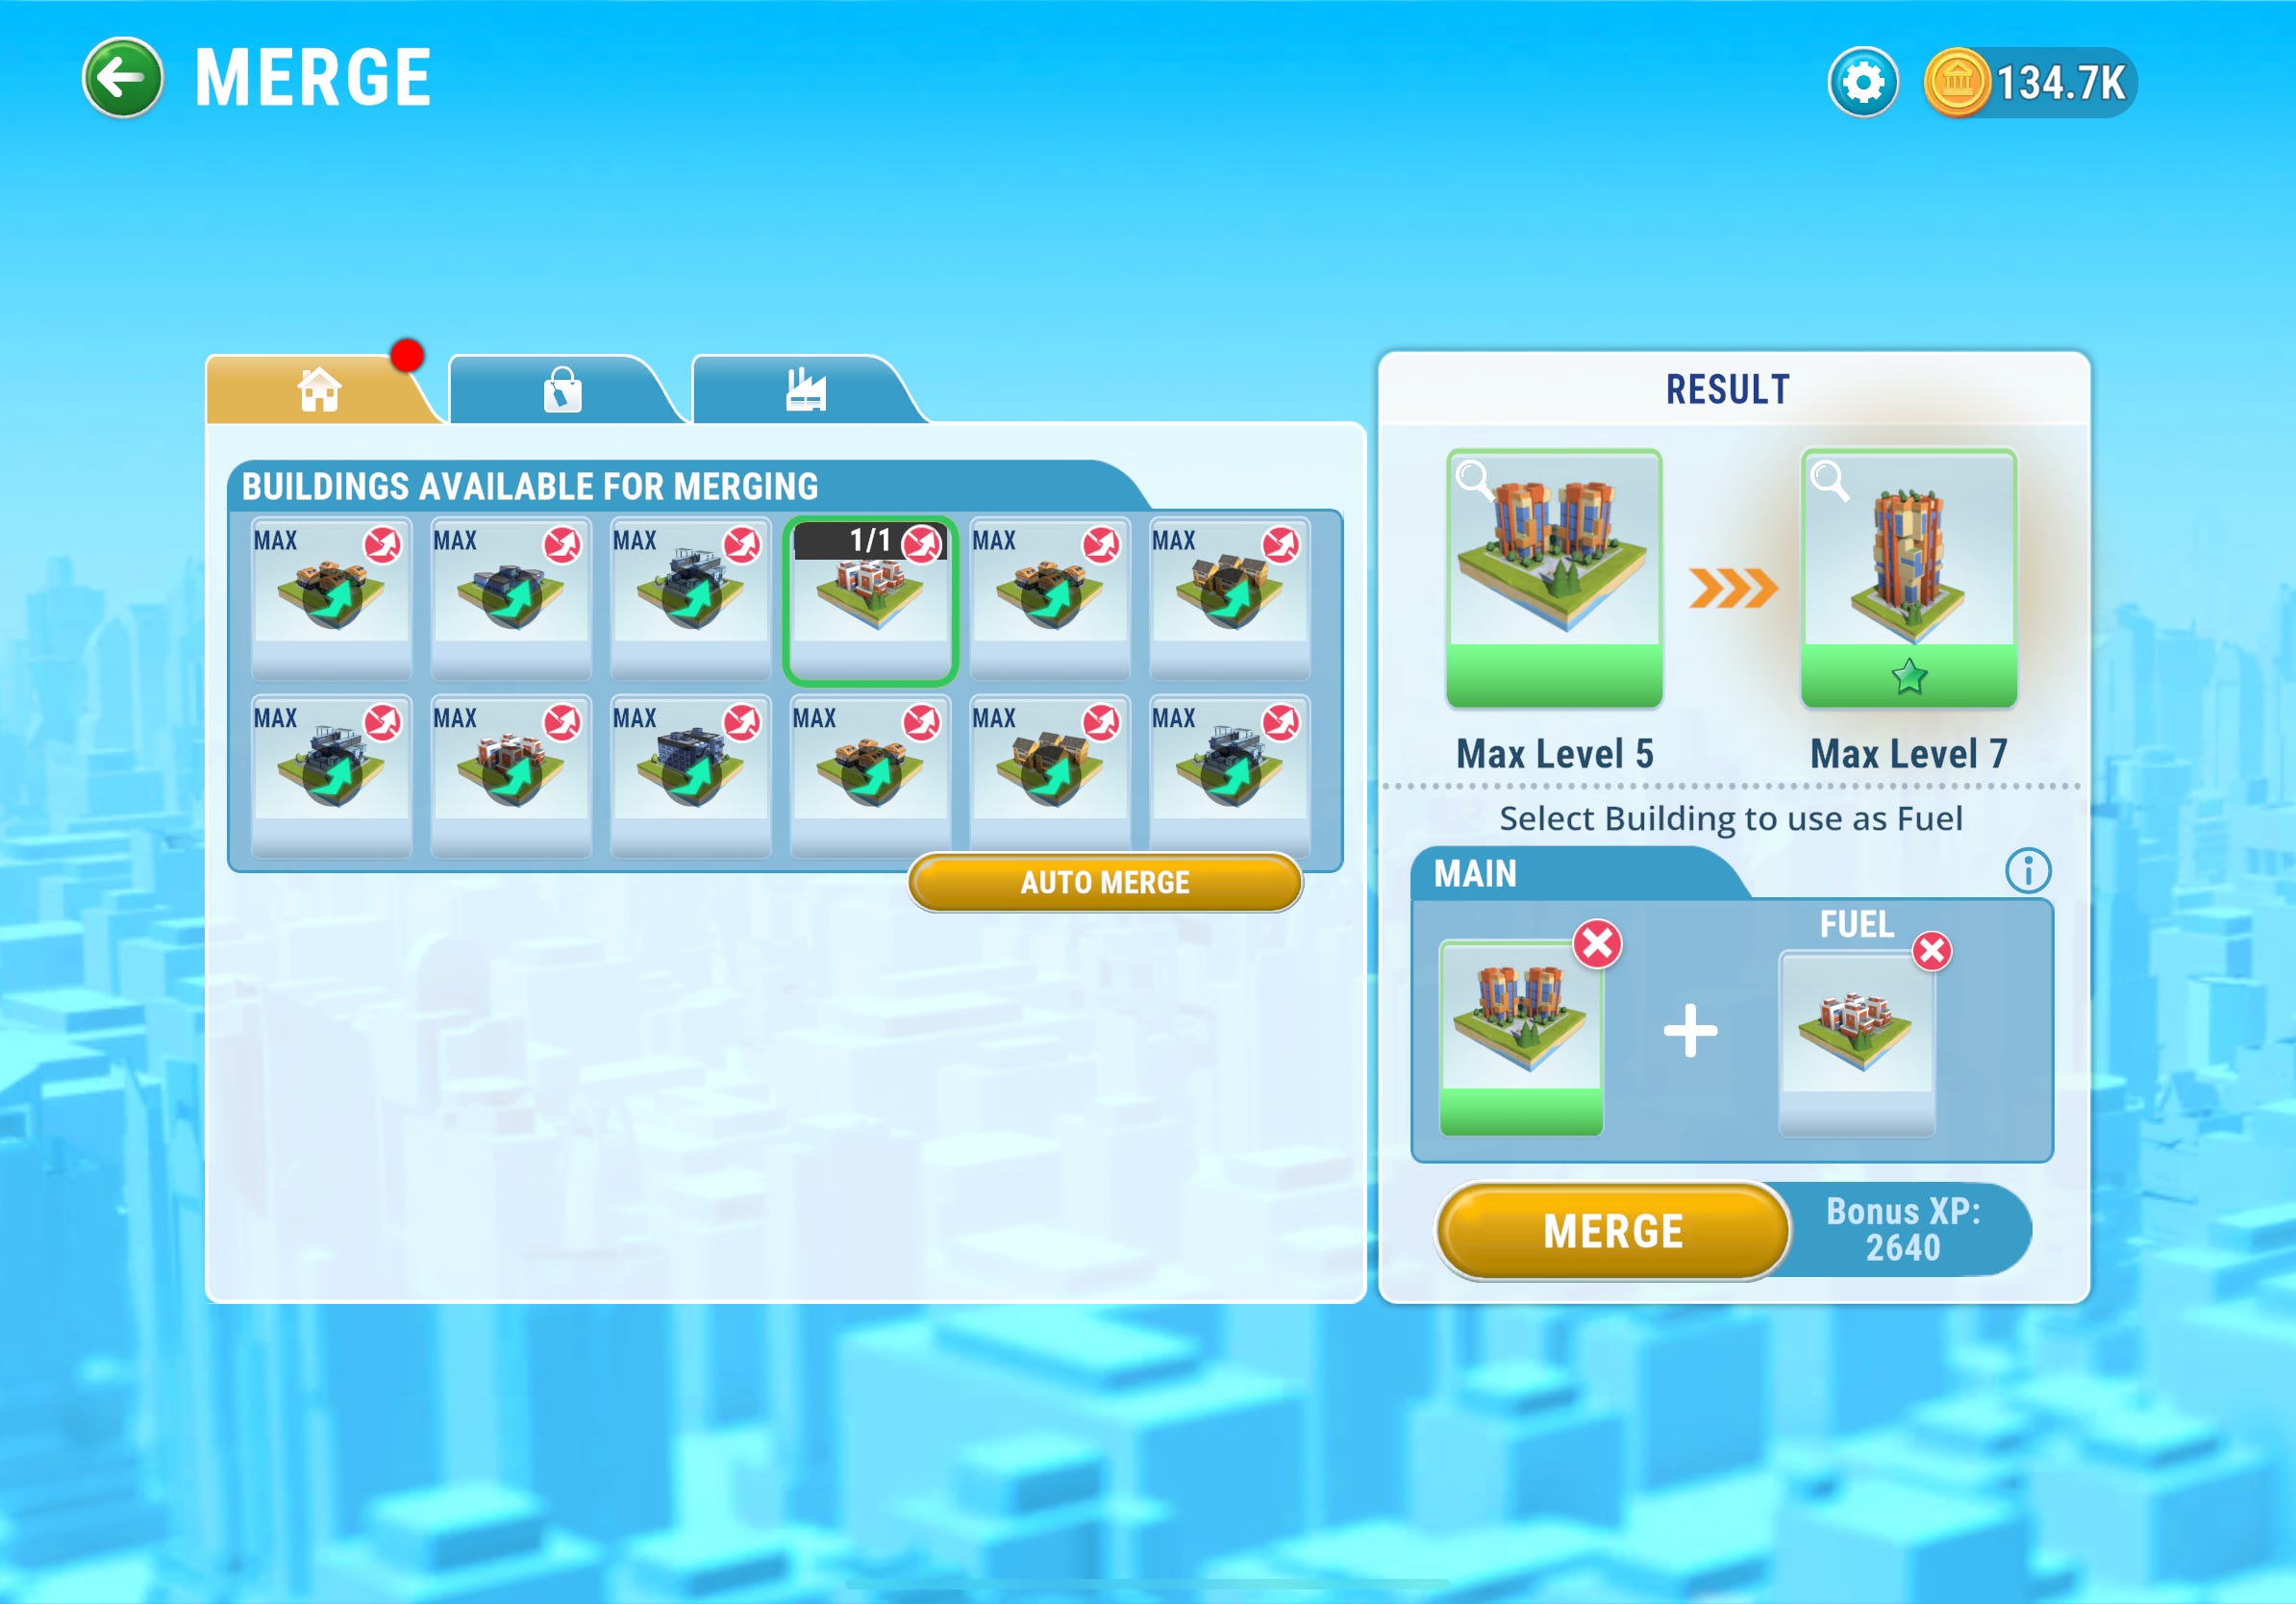 Cityscapes: Sim Builder - by Adrian Hon - Have You Played?